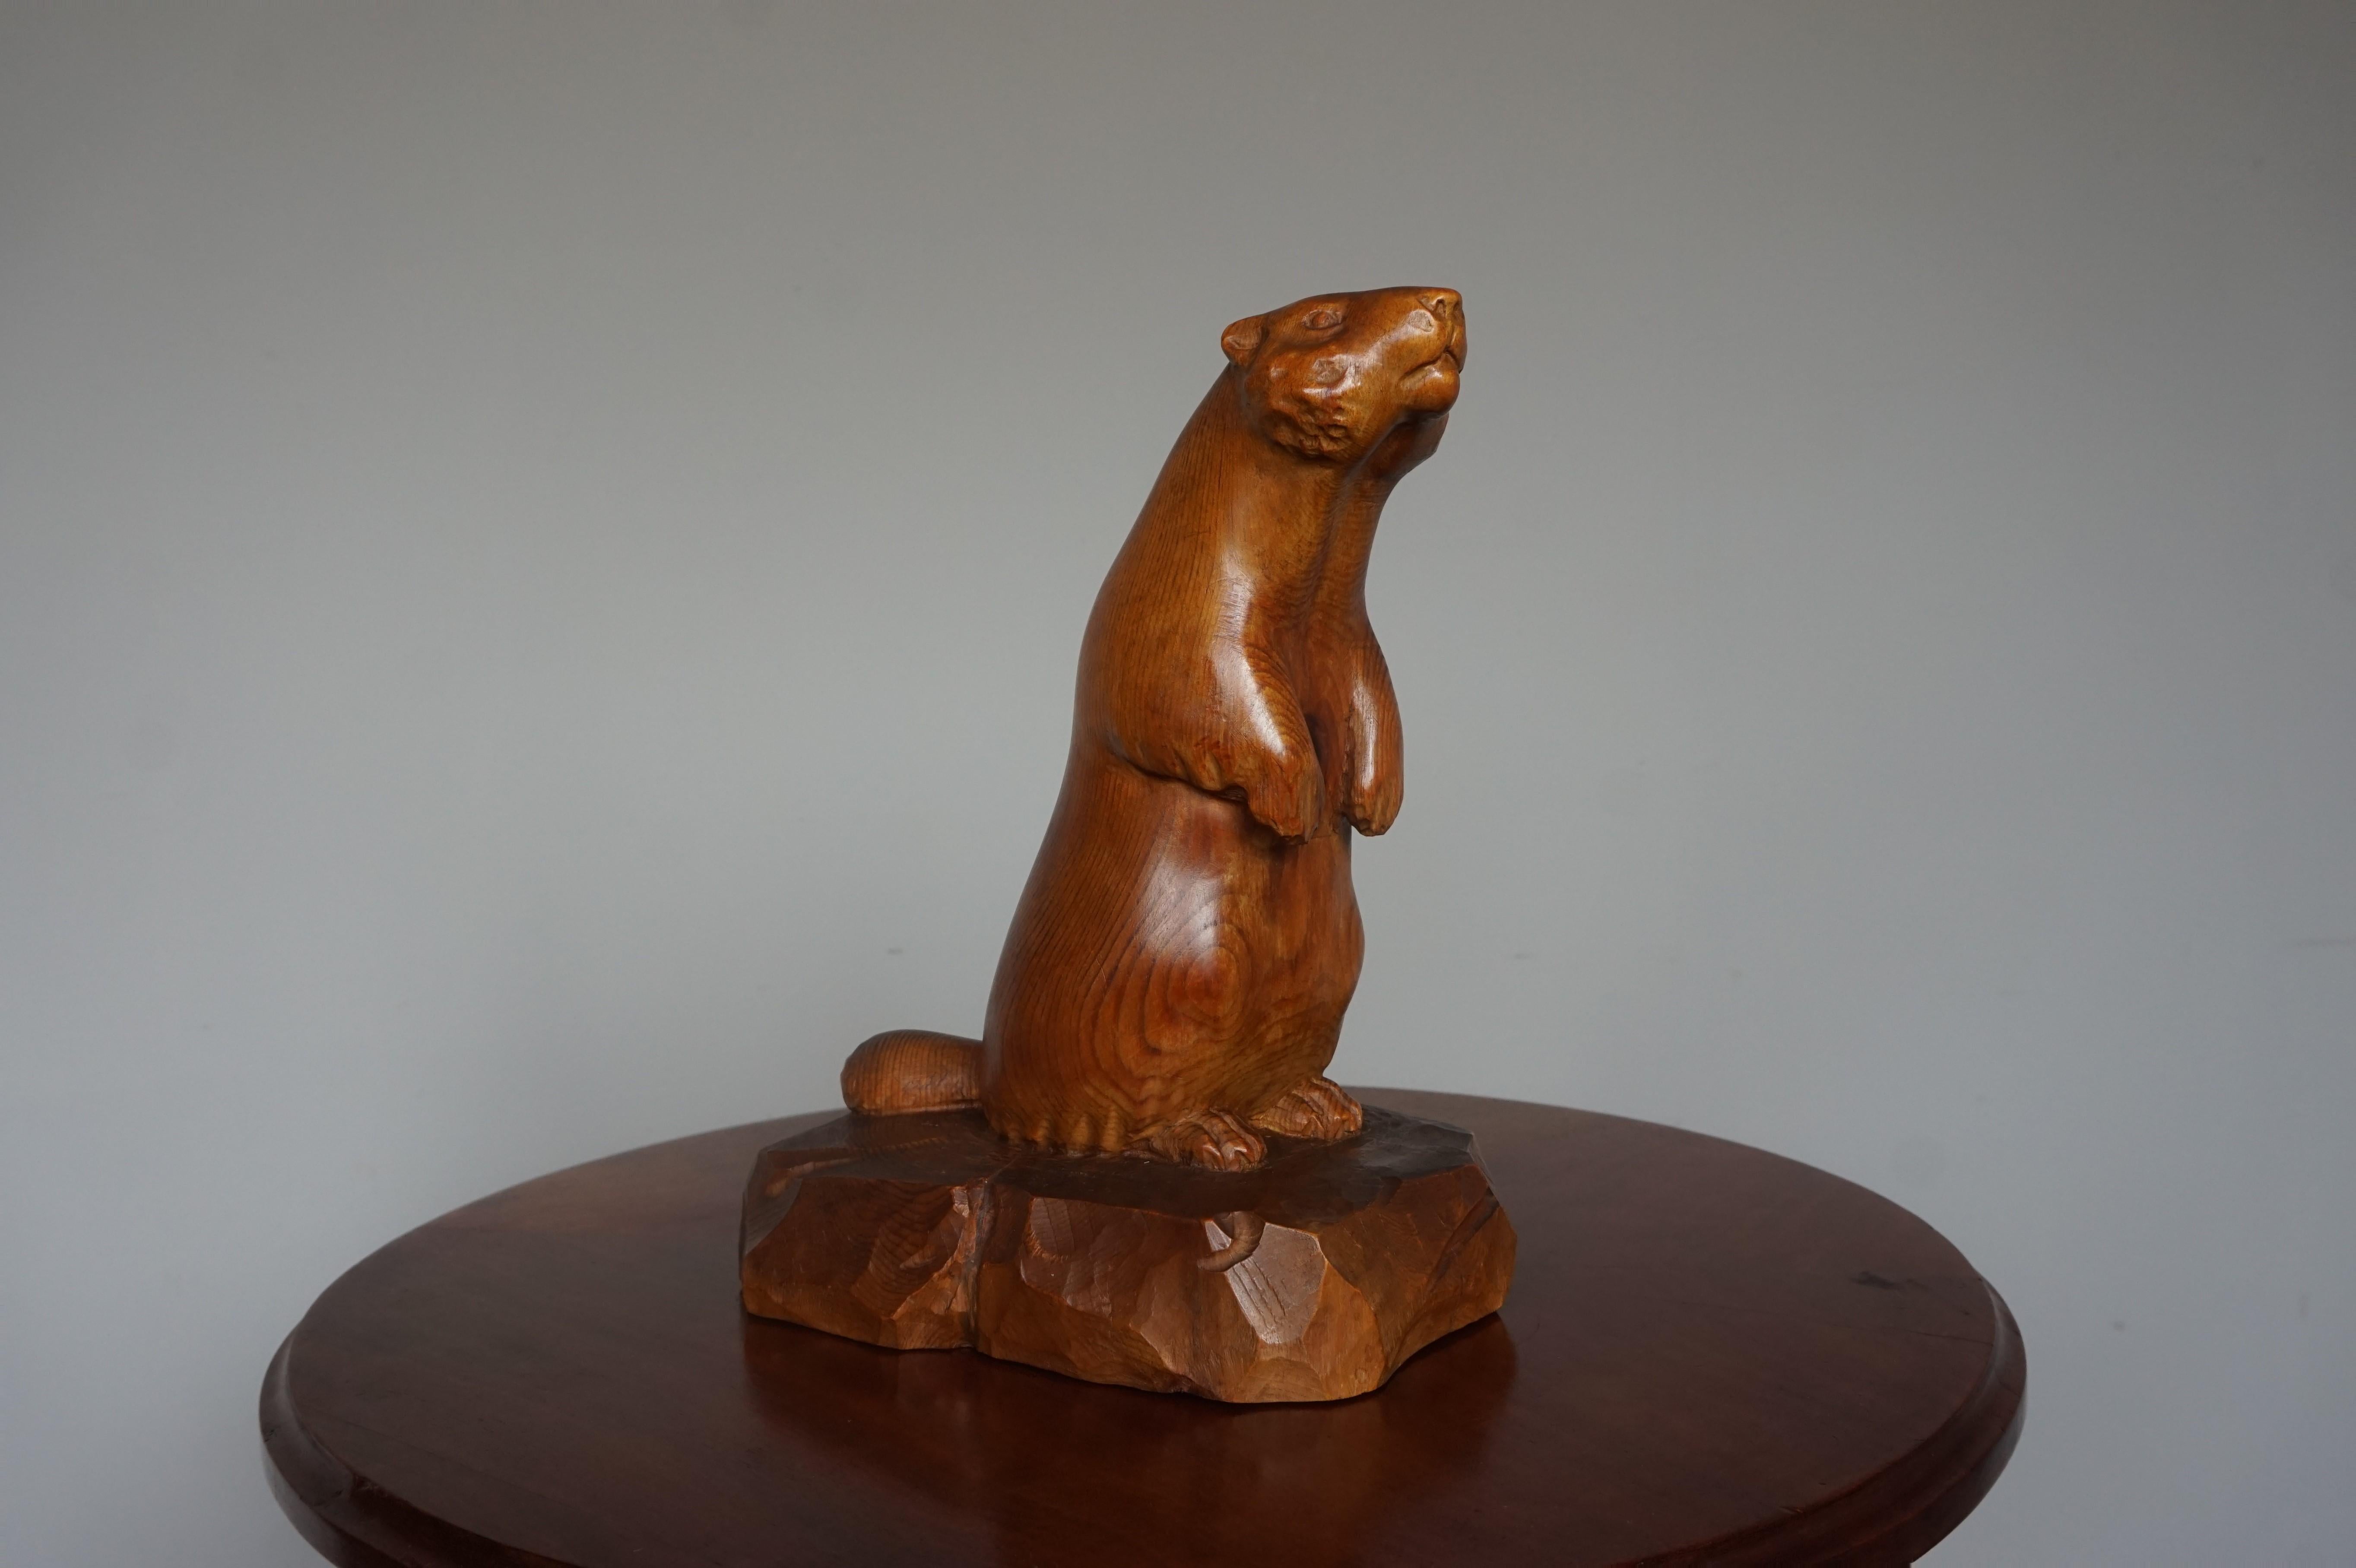 Once in a lifetime find.

This probably is the coolest ever and most realistic groundhog sculpture you will ever see. We have searched the worldwide web and nothing even comes close. This clearly is the work of a master carver and to have found it